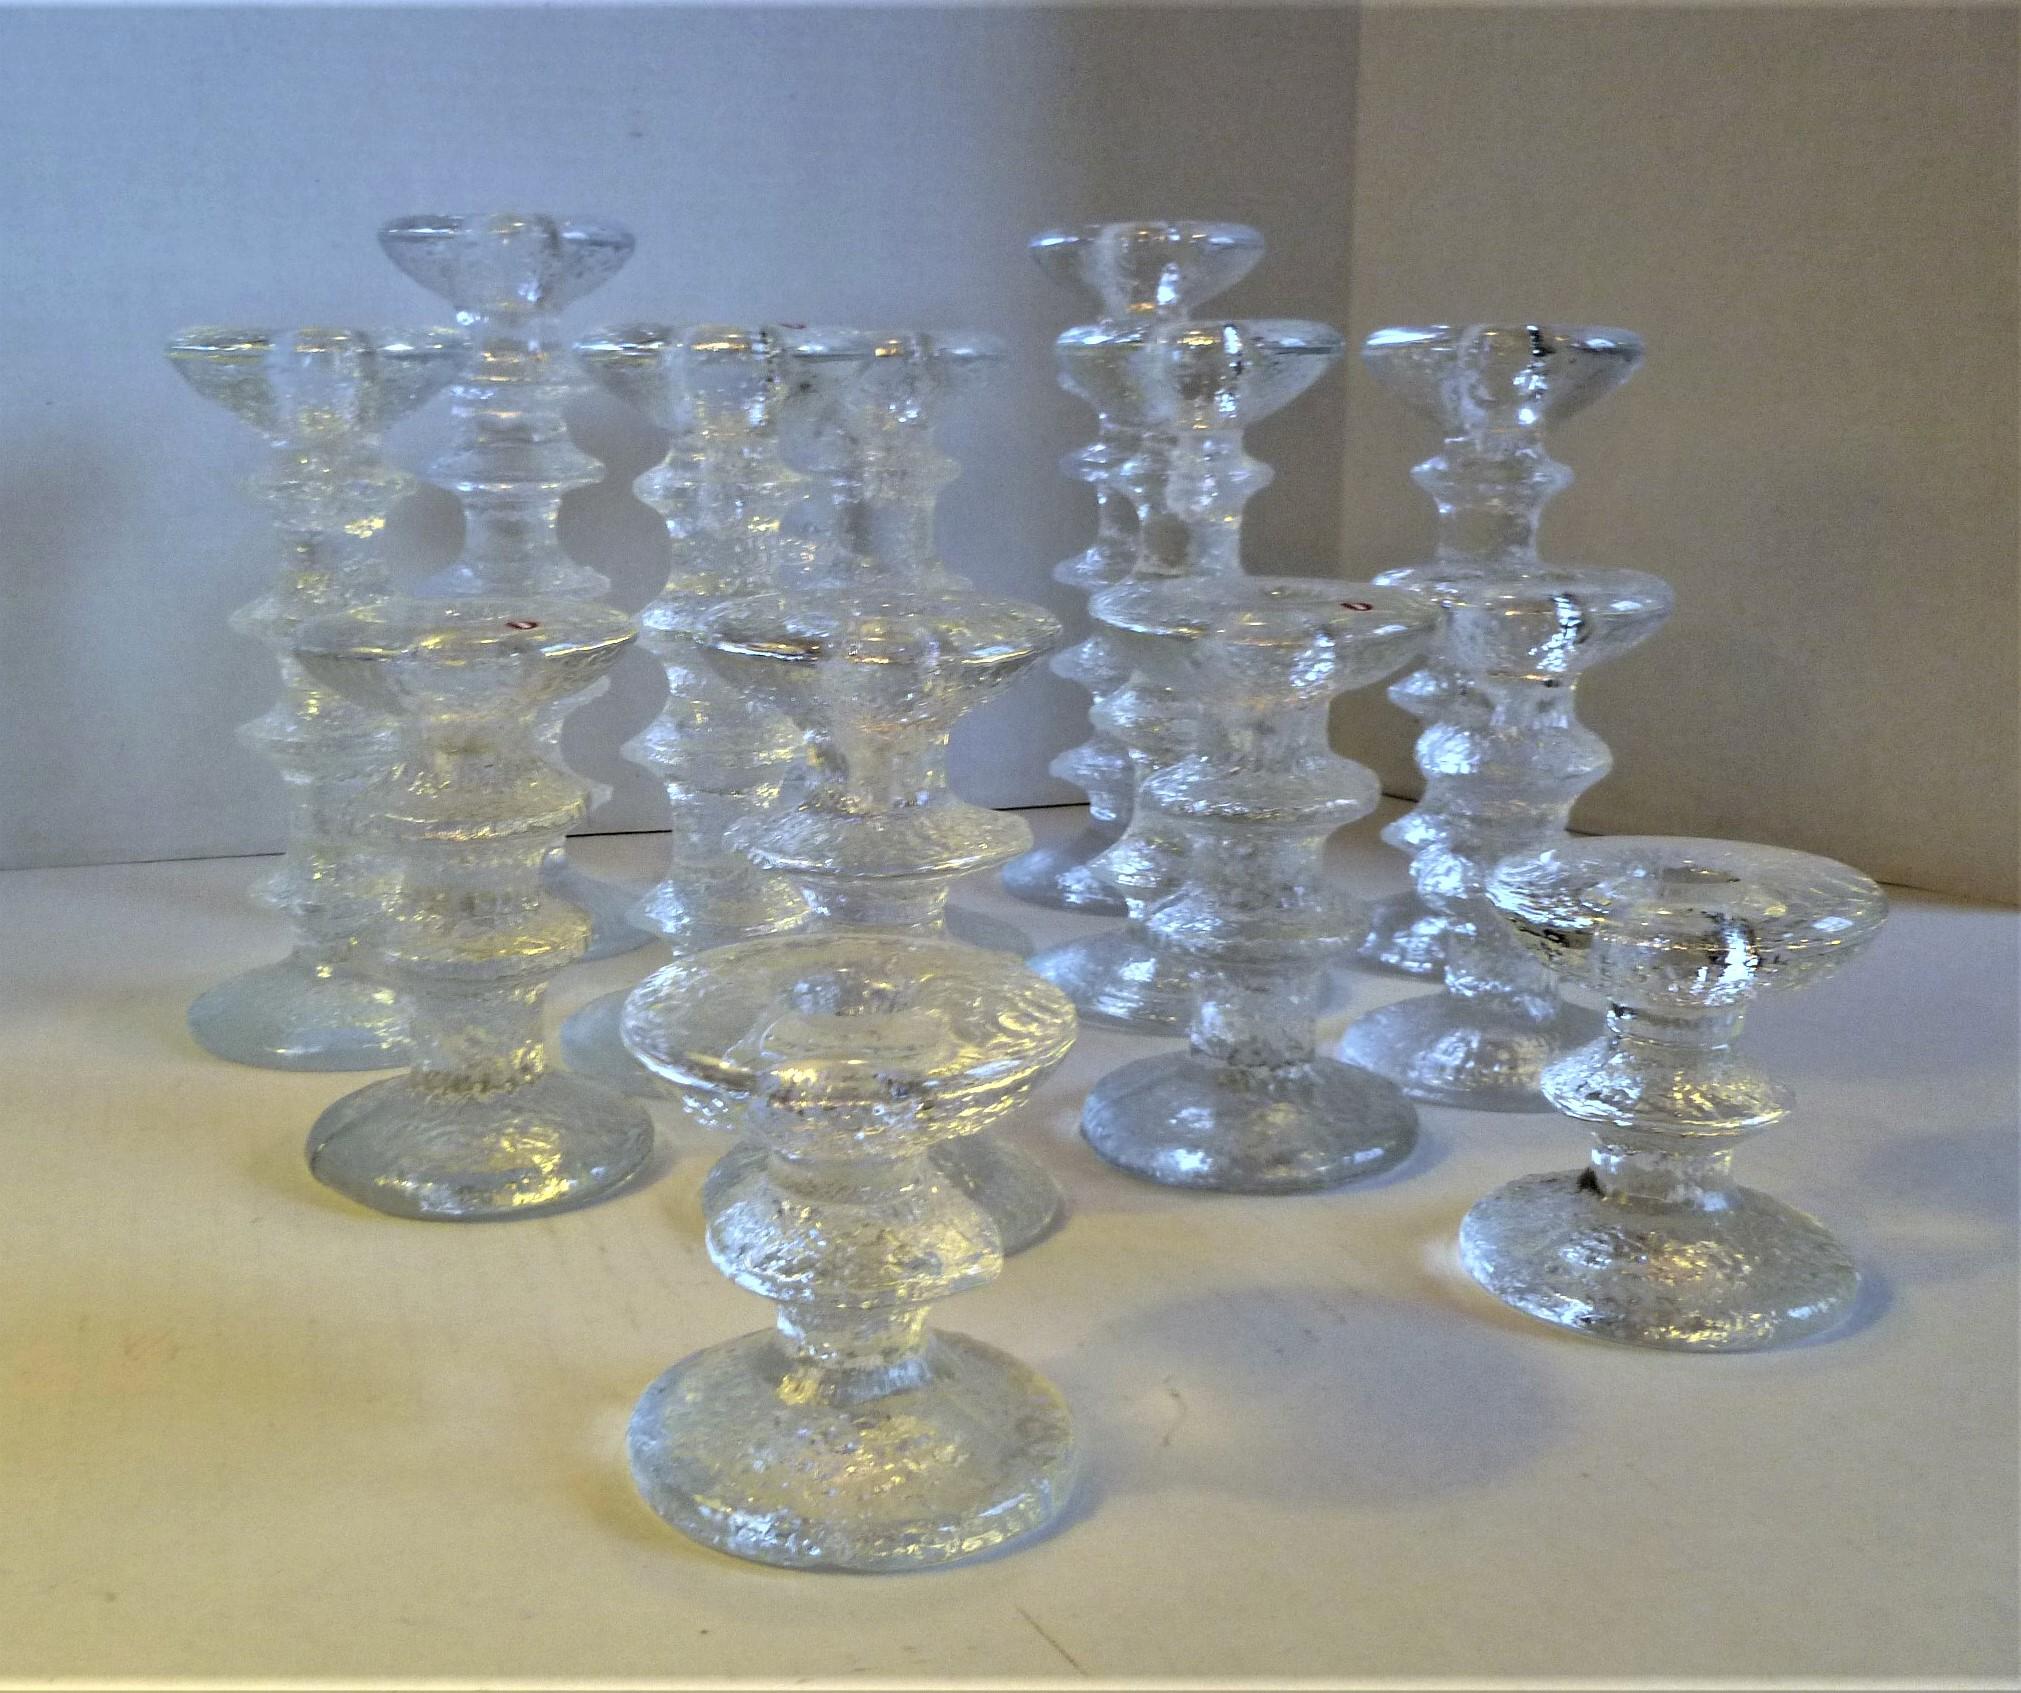 REDUCED FROM $1,250....Group of 14 Festivo textured glass candleholders by Timo Sarpaneva for Iittala Finland. According to Iittala's website, Sarpaneva original design was a wine glass that would accommodate a full bottle of wine, great!! The